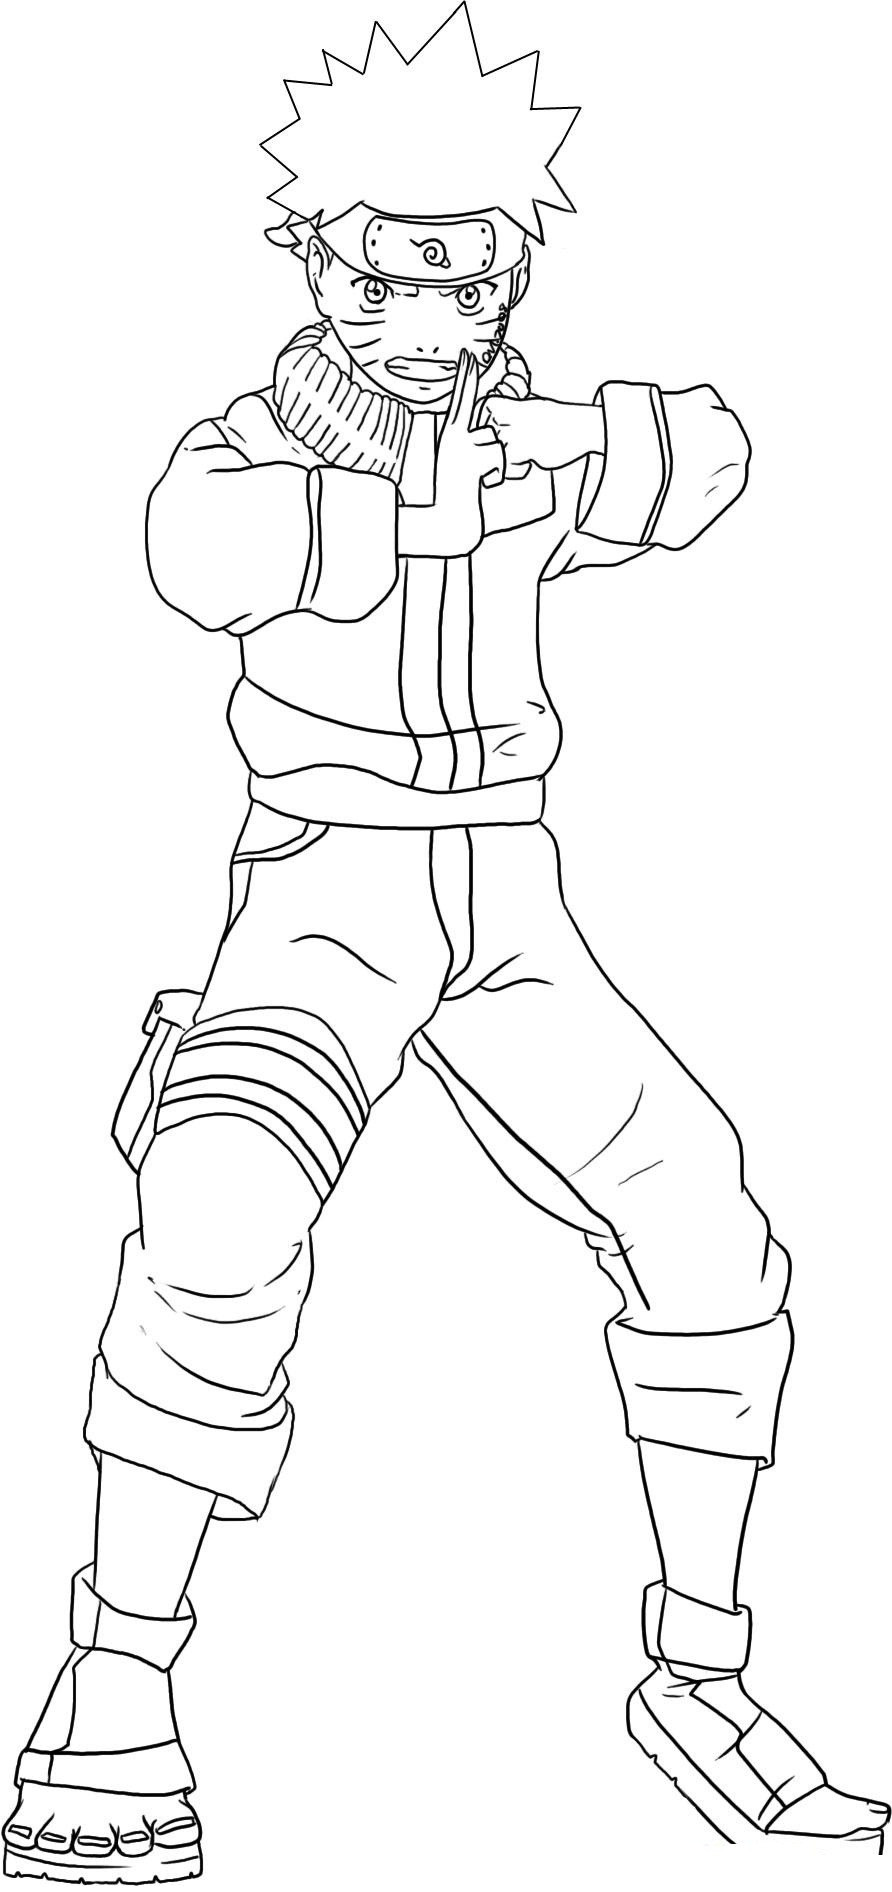 Naruto Shippuden Coloring Pages
 Free Printable Naruto Coloring Pages For Kids